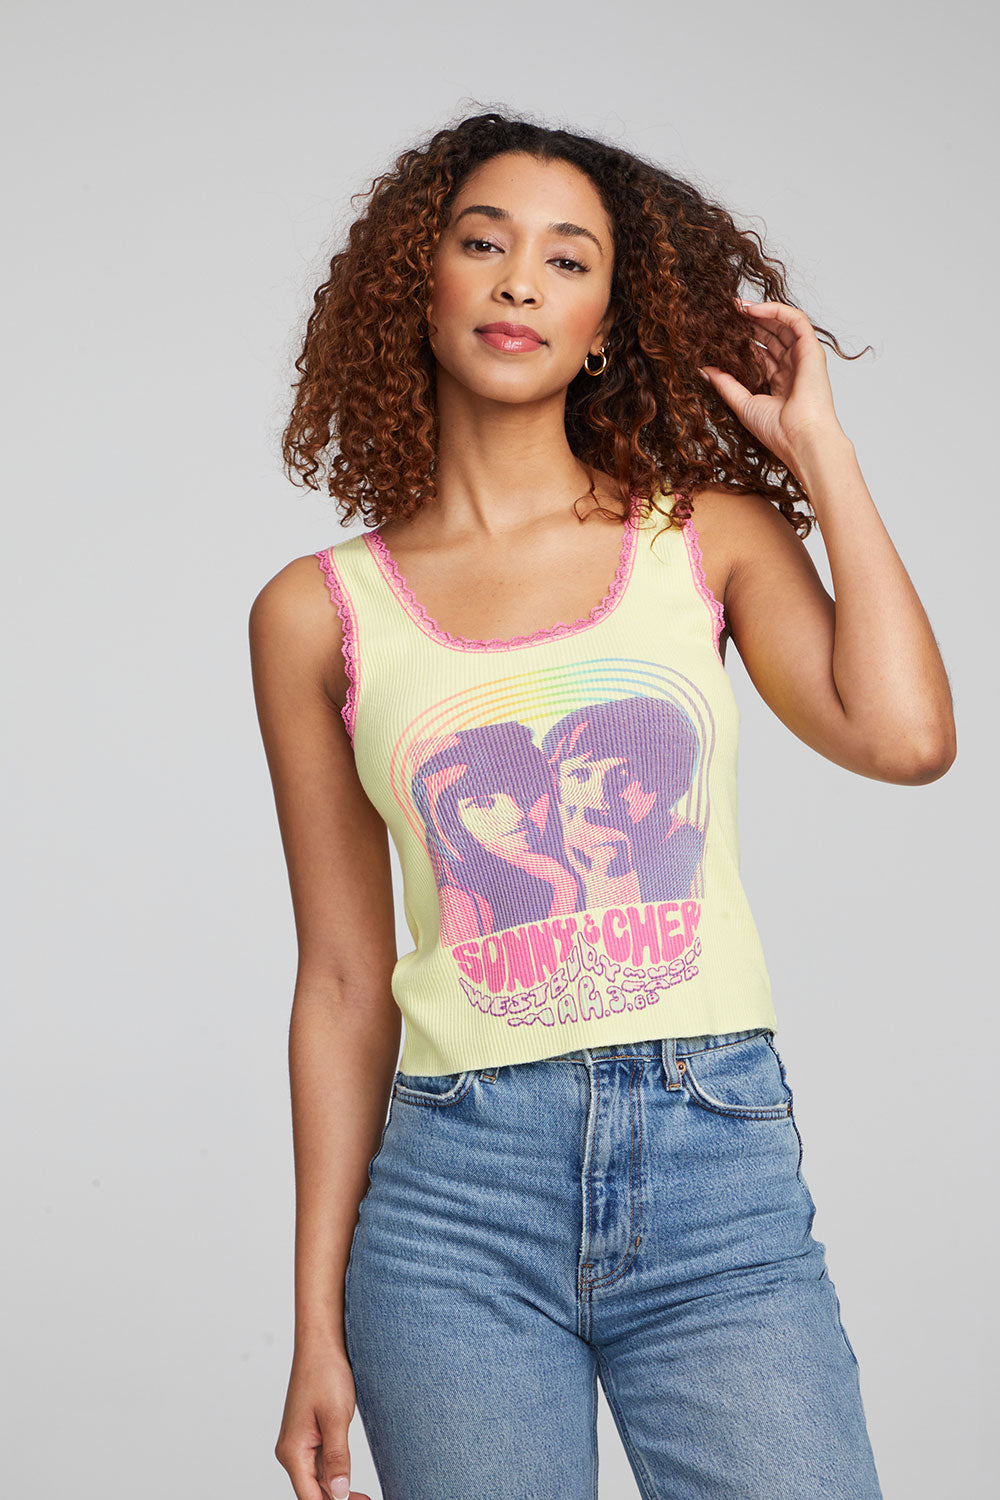 Sonny &amp; Cher &quot;Westbury Music Fair&quot; Tank Top WOMENS chaserbrand